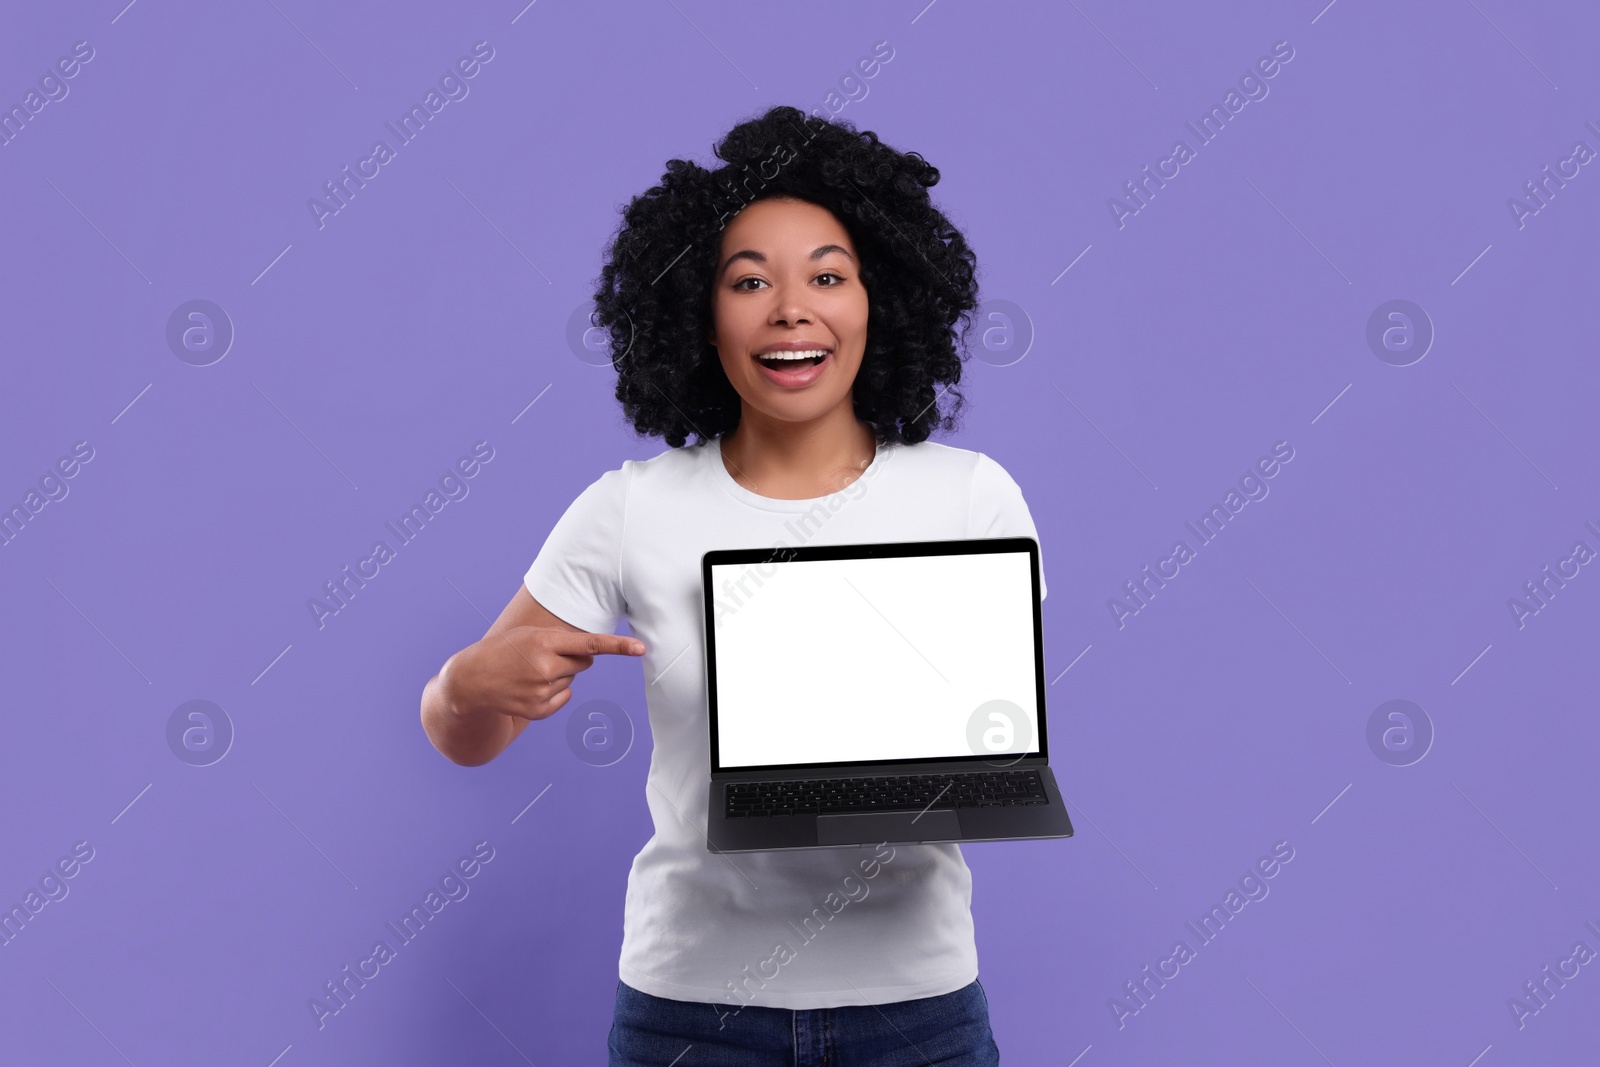 Photo of Happy young woman showing laptop on purple background